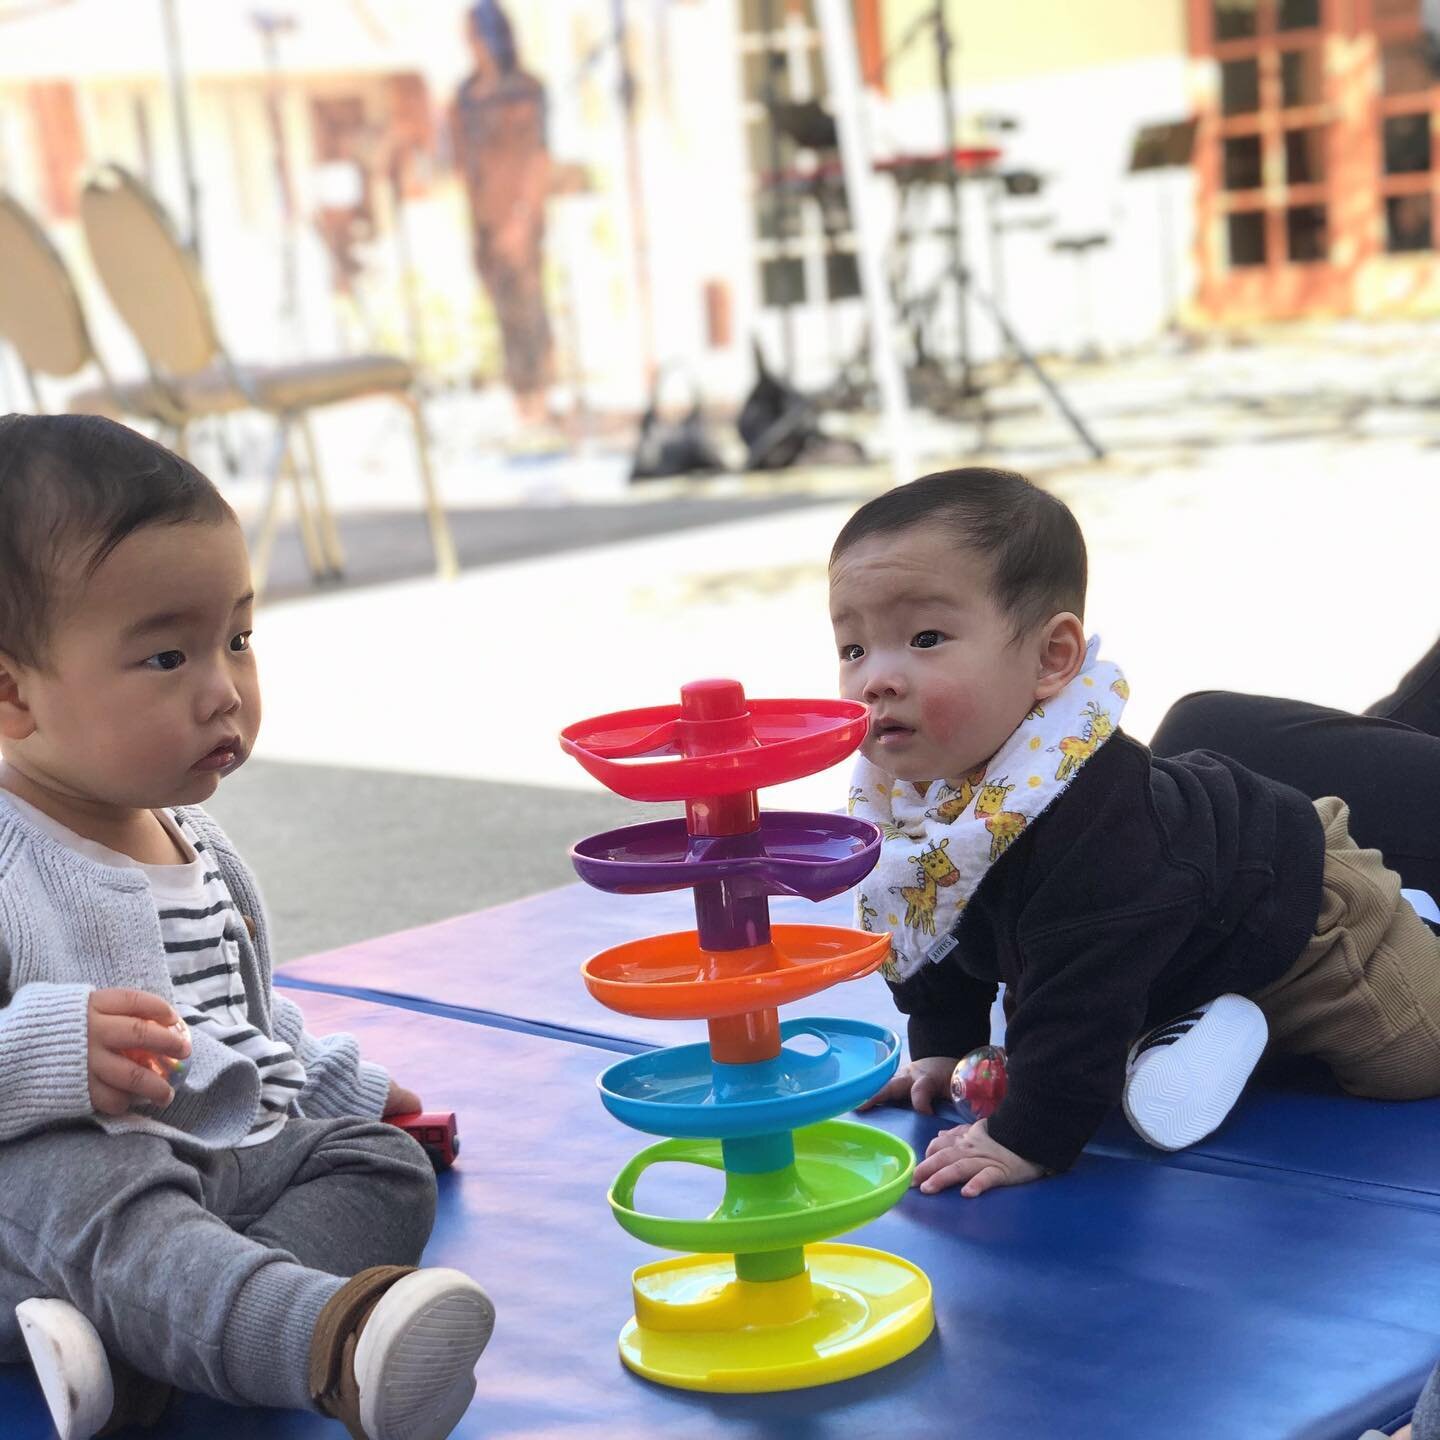 Meet the newest little ones of the Carpoolers lifegroup at their first outdoor service together! 🥰 #epicentrewestla #epicentreexplorers